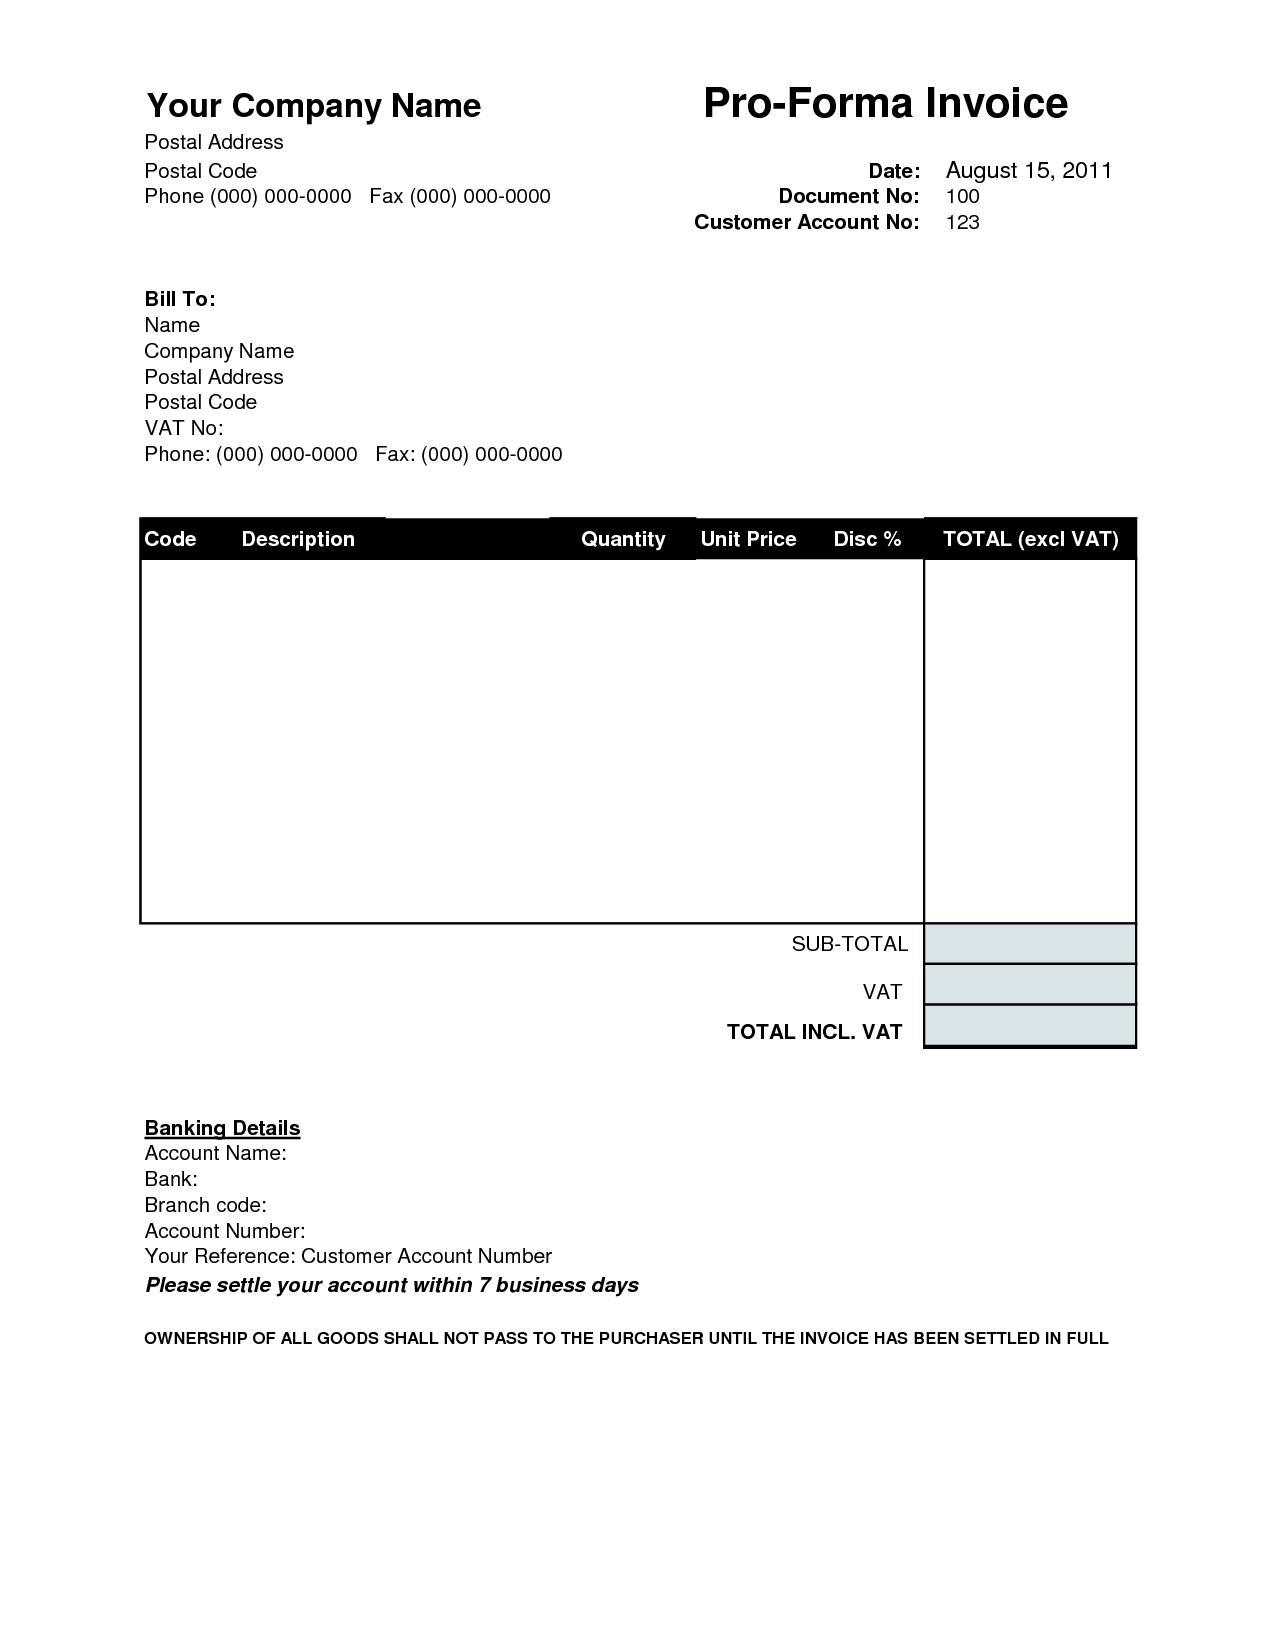 proforma tax invoice pro forma template excel business planning spreadsheets proforma 1275 X 1650